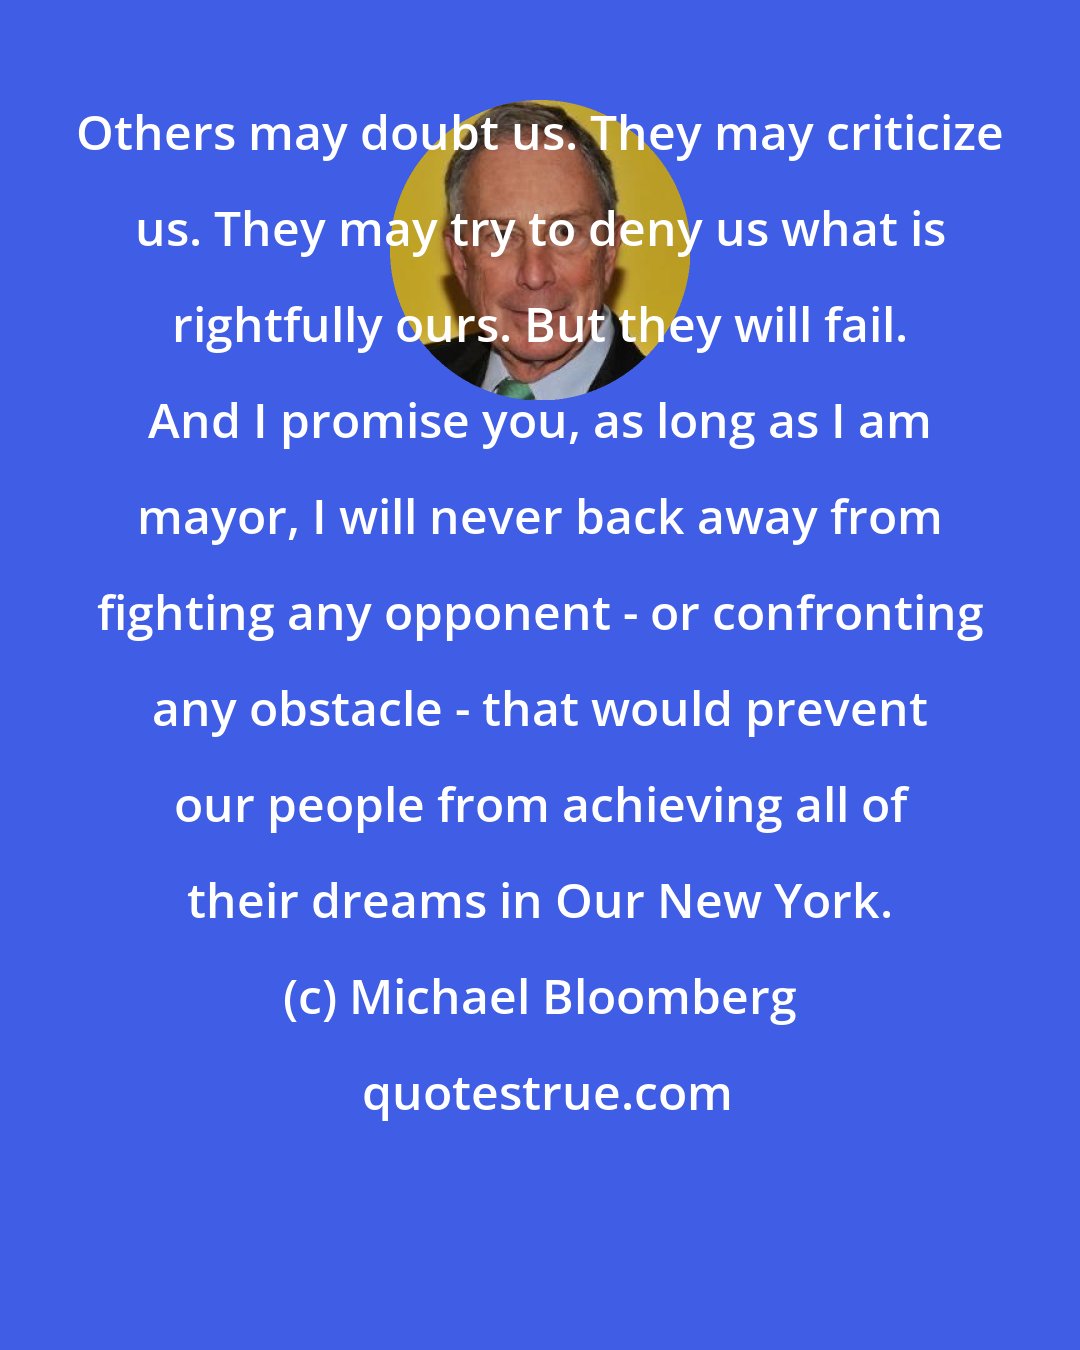 Michael Bloomberg: Others may doubt us. They may criticize us. They may try to deny us what is rightfully ours. But they will fail. And I promise you, as long as I am mayor, I will never back away from fighting any opponent - or confronting any obstacle - that would prevent our people from achieving all of their dreams in Our New York.